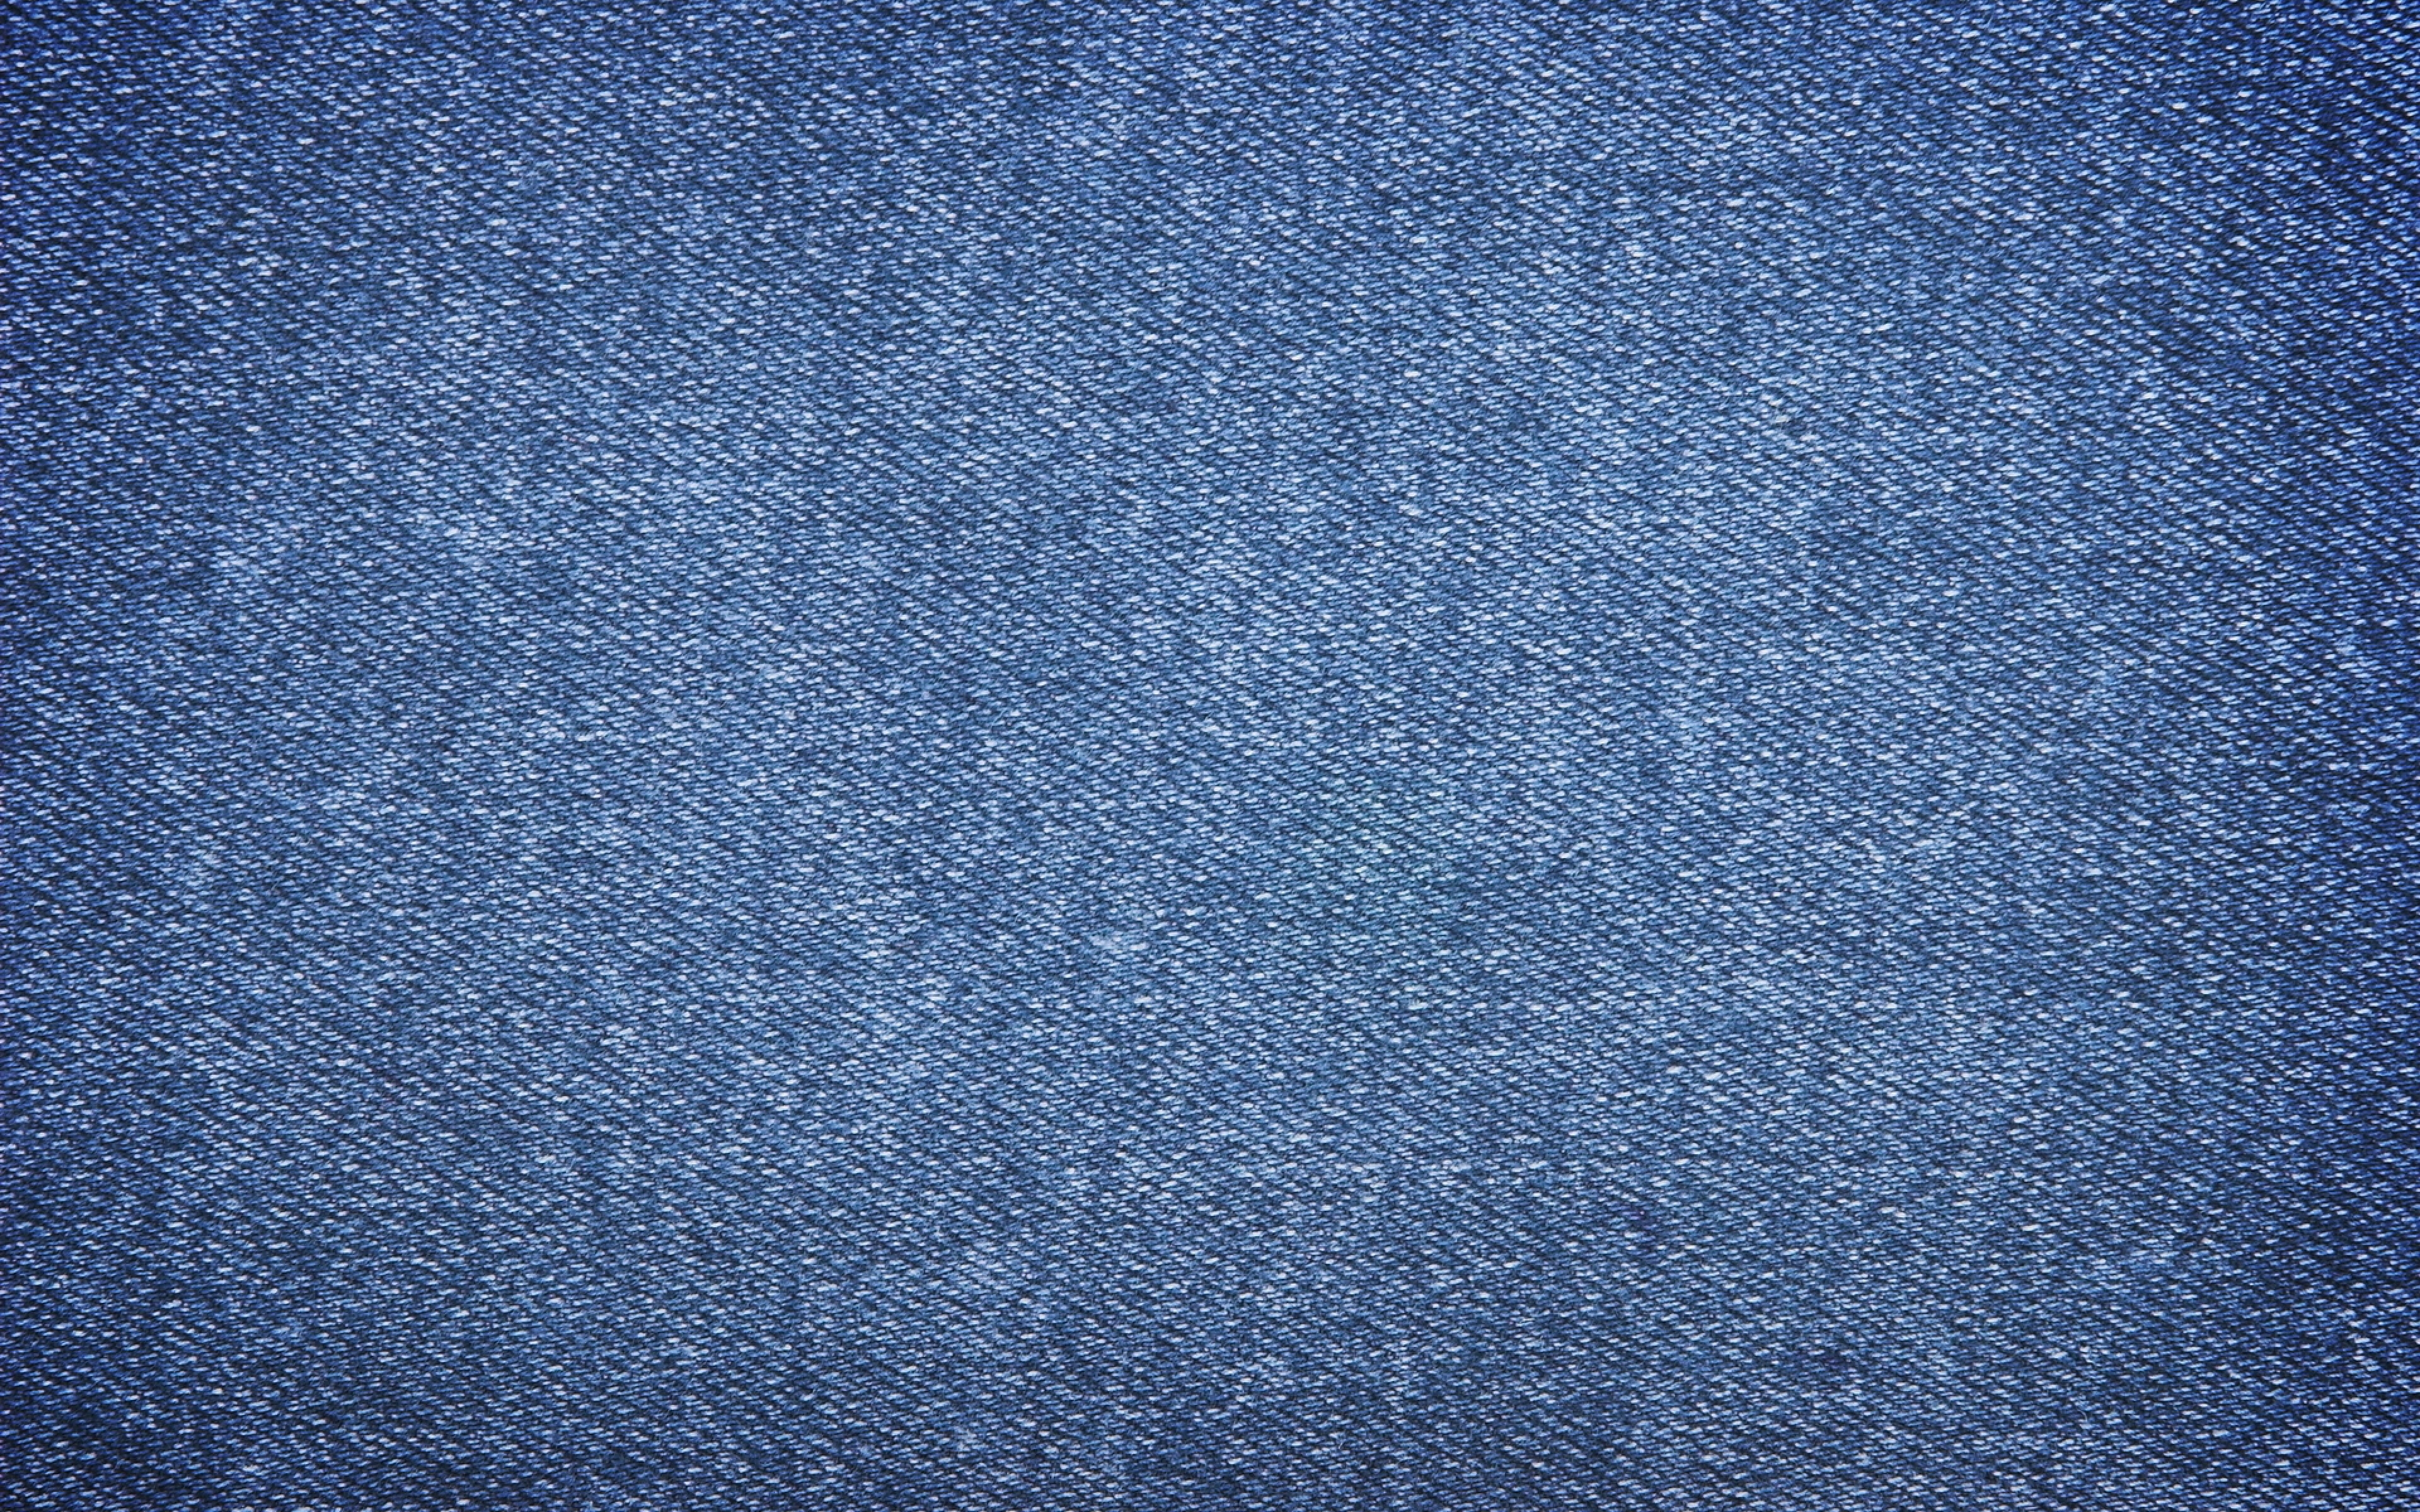 Texture Background Jeans Surface Wallpaper Ultra HD 4k